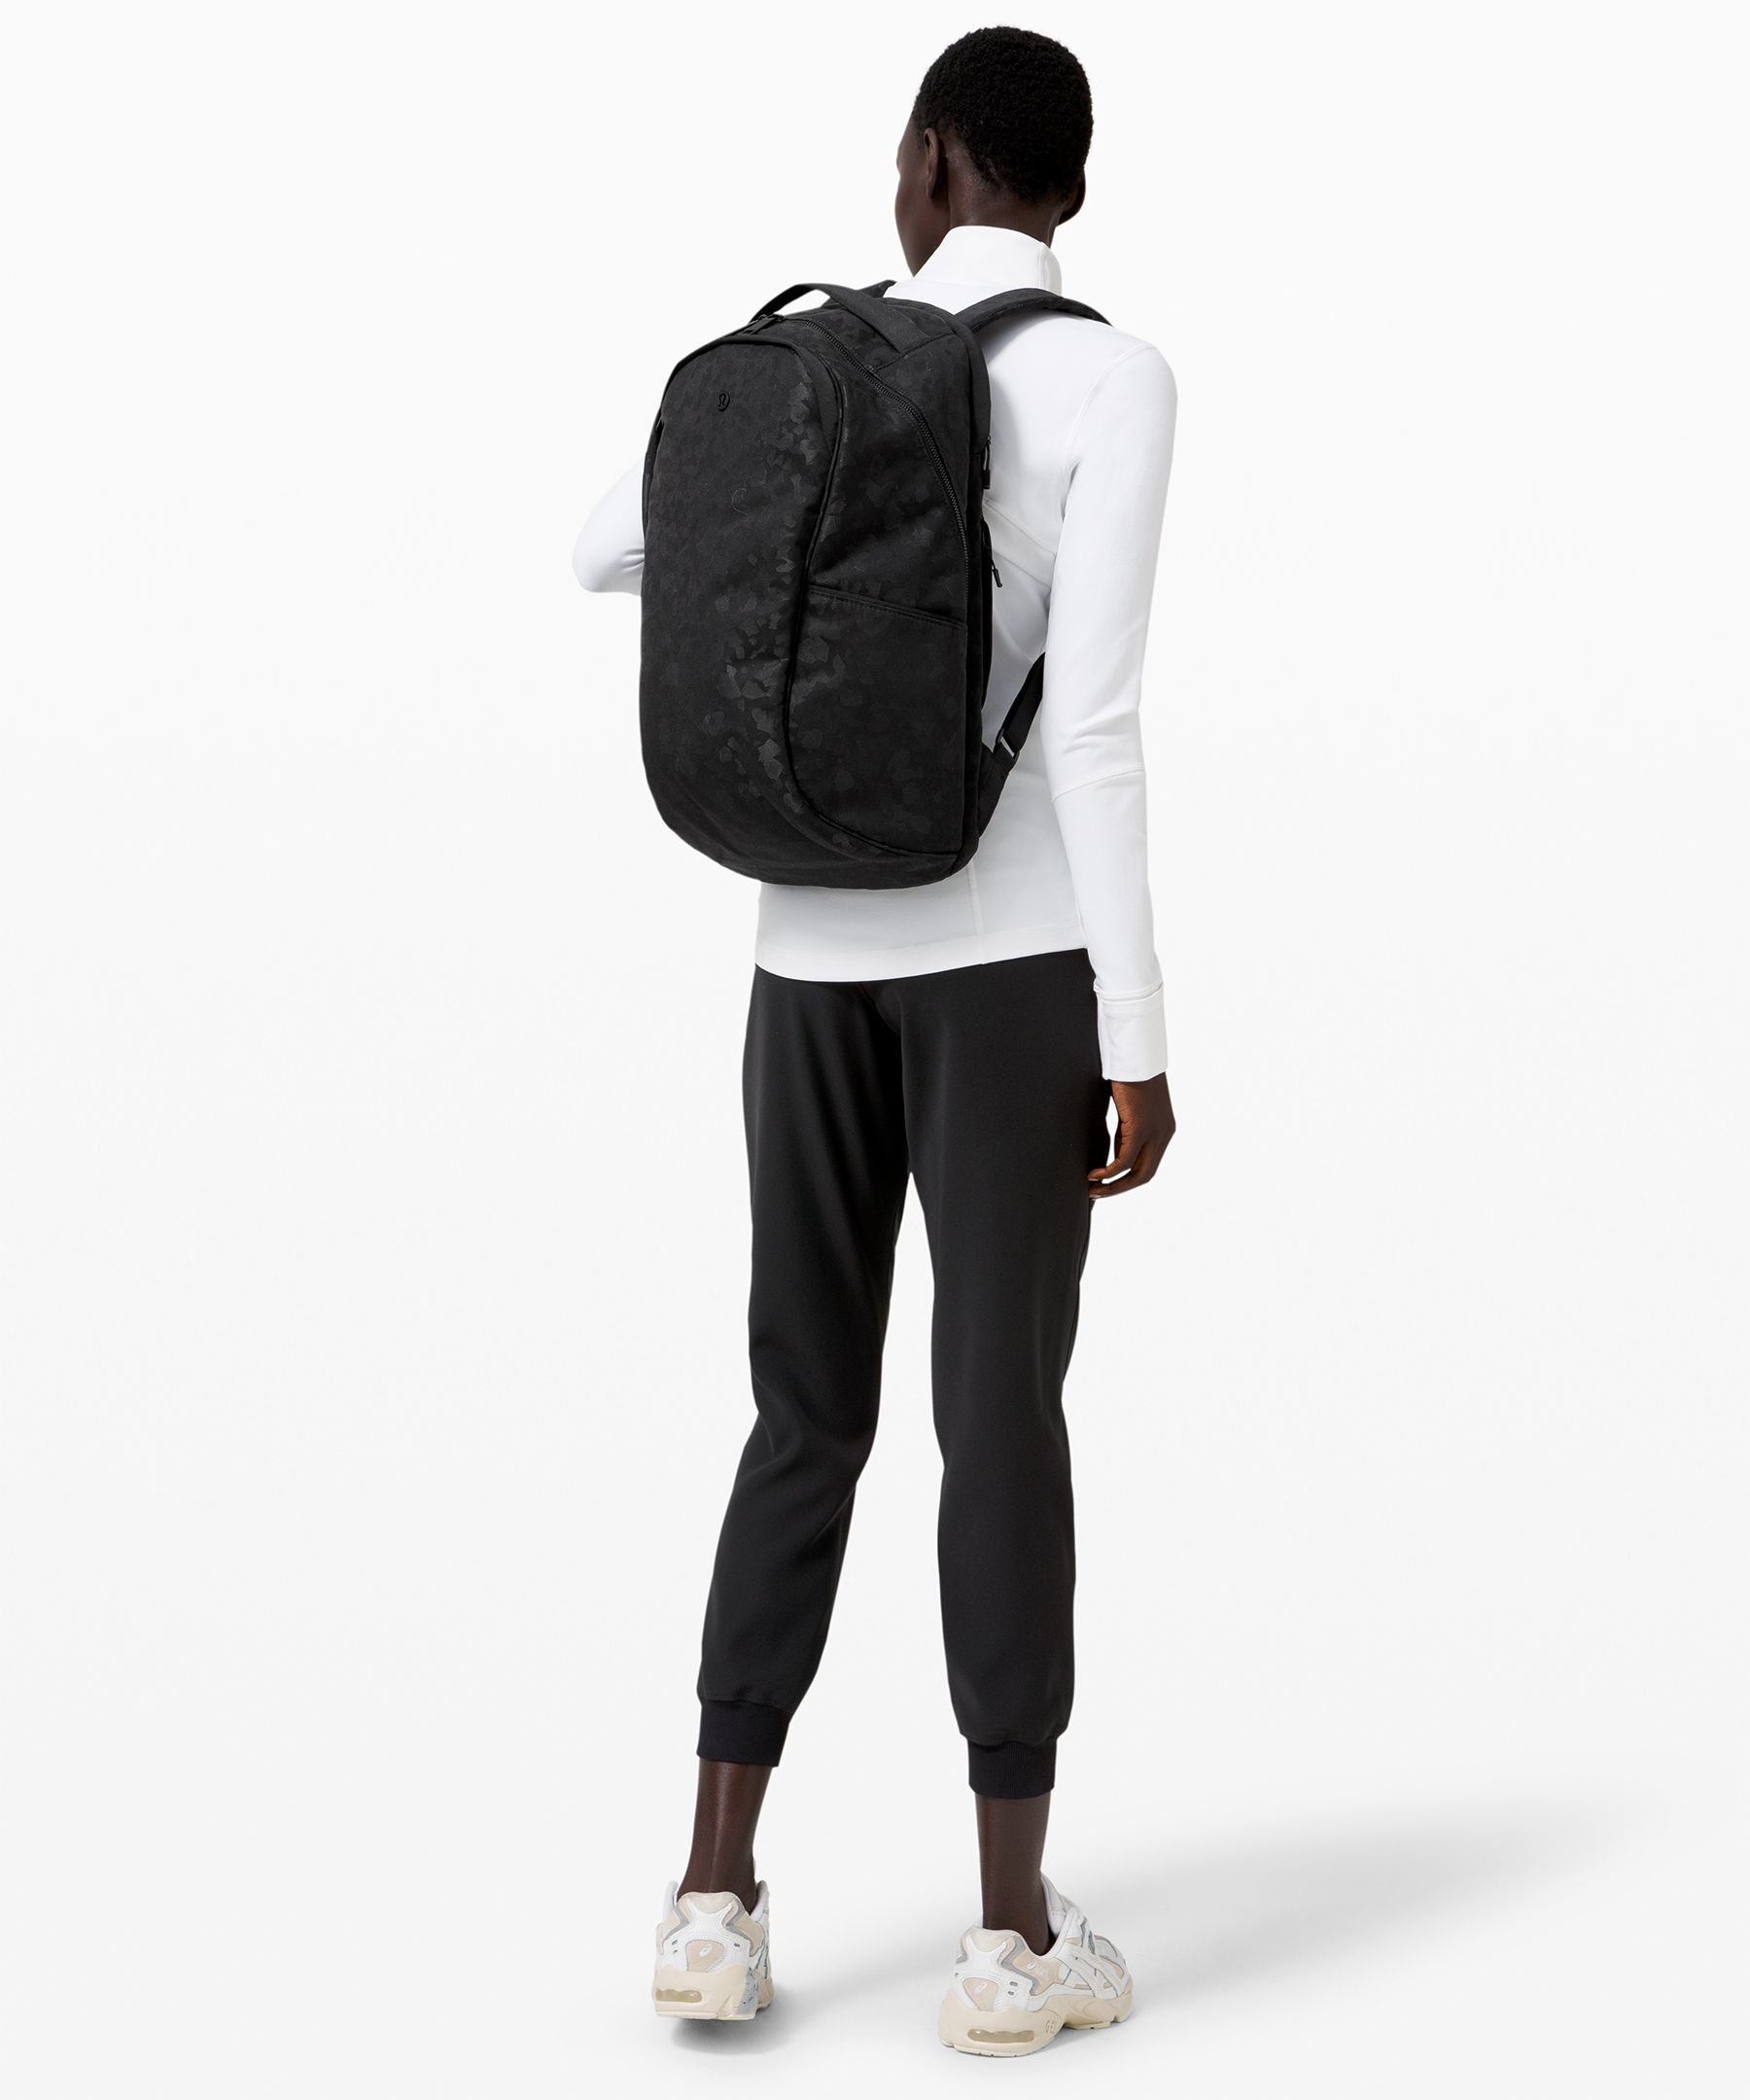 Out of Range Backpack | We Made Too 